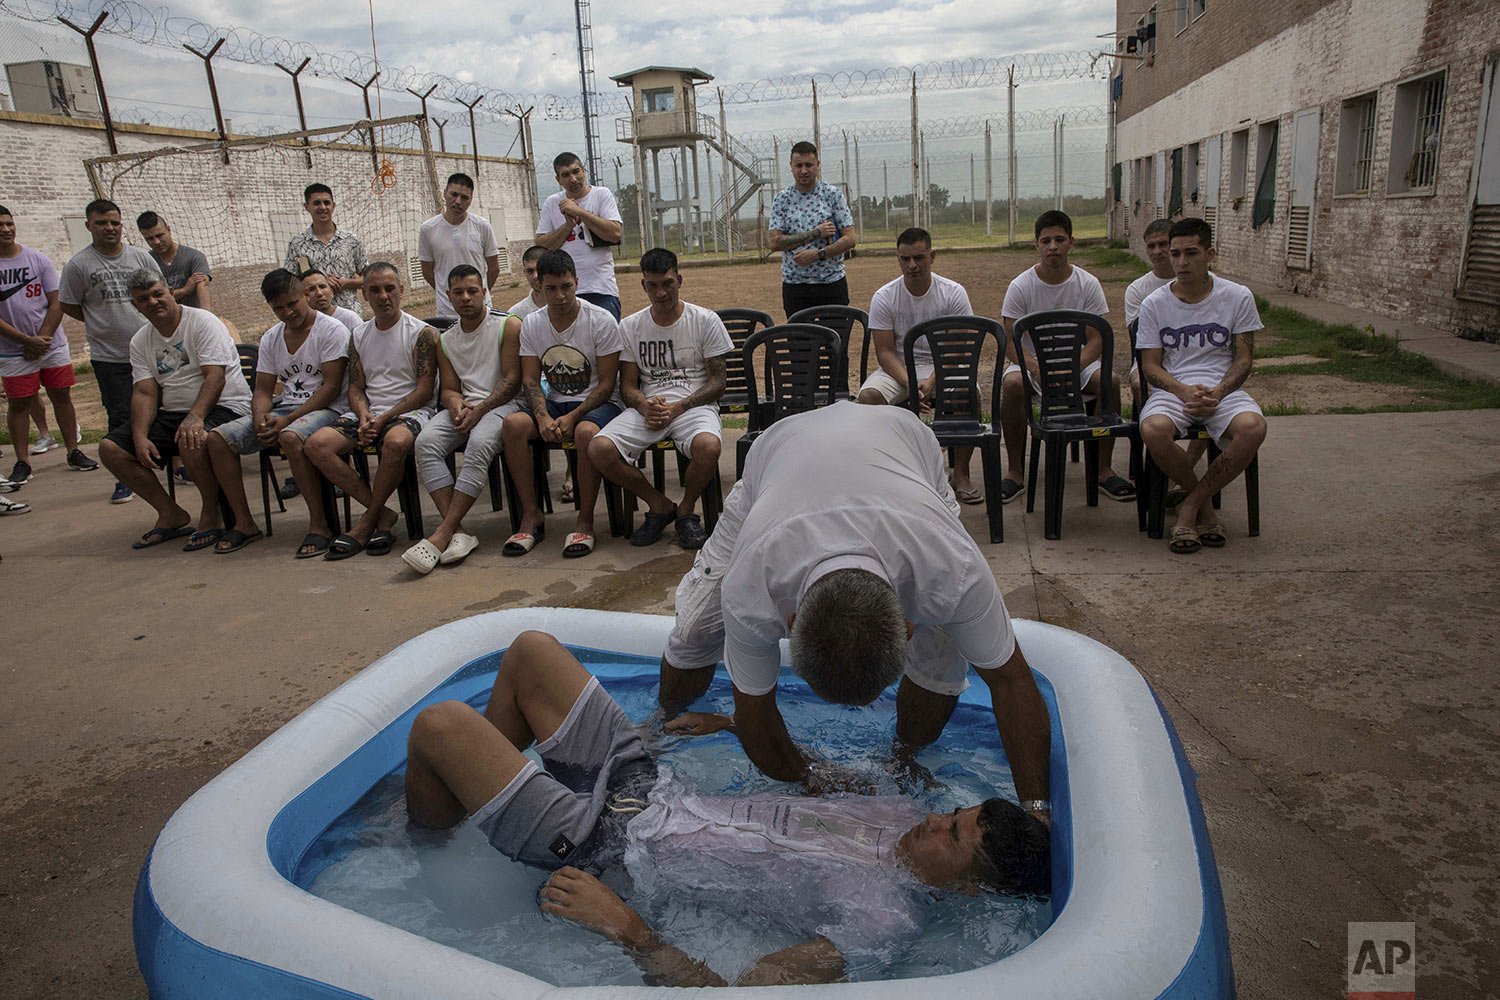  Ruben Munoz, an evangelical pastor from the church Puerta del Cielo, or "Heaven's Door," who served two years in prison for robbery, baptizes an inmate in a kiddie pool, at an evangelical cellblock inside Penal Unit N11 in Pinero, Santa Fe province,